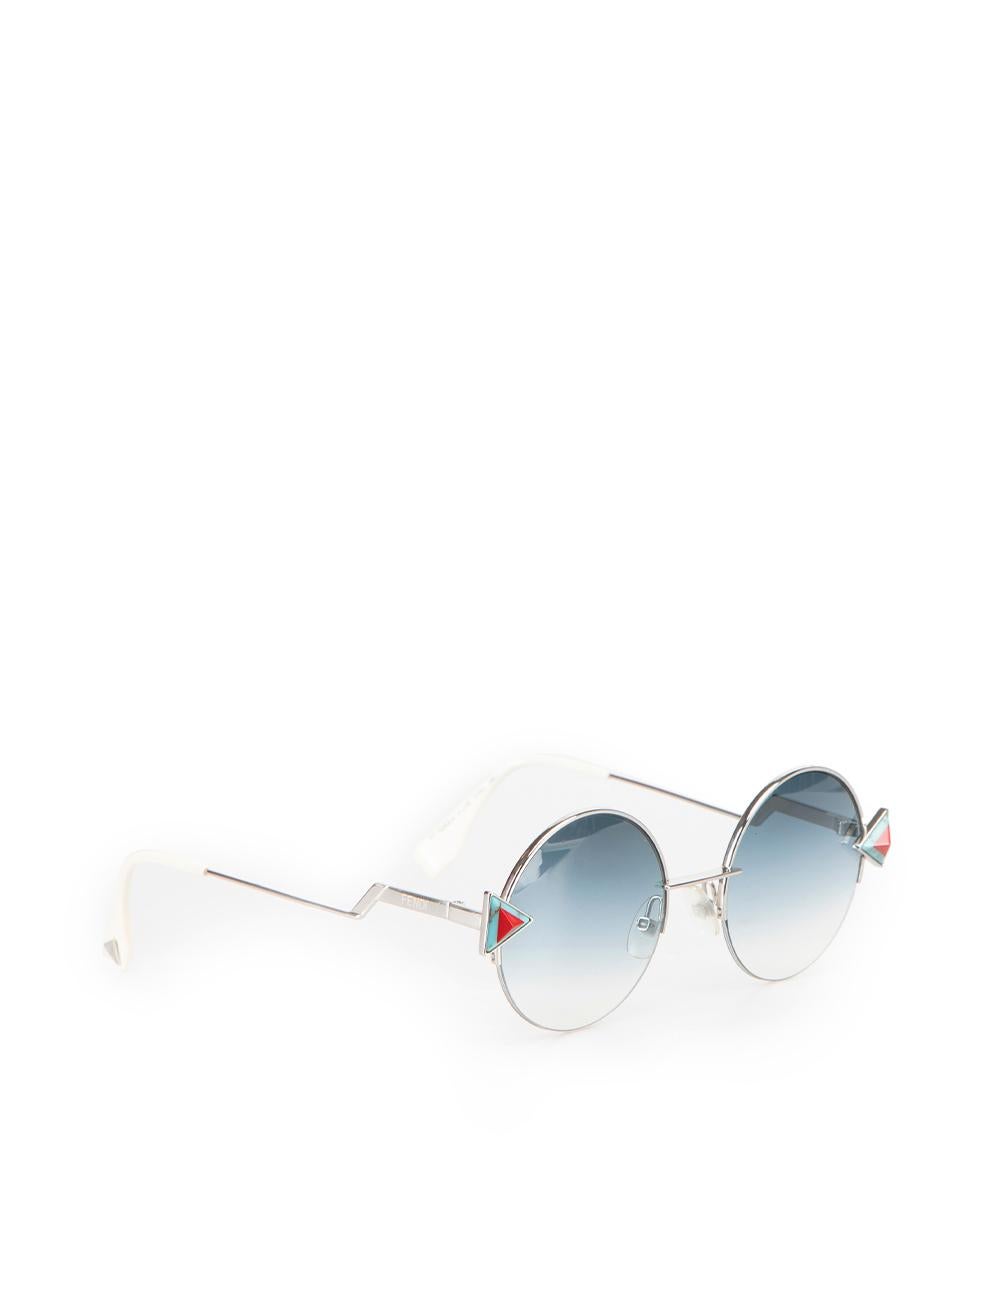 CONDITION is Very good. Hardly any visible wear to sunglasses is evident on this used Fendi designer resale item.



Details


Multicolour

Metal

Sunglasses

Round frame

Red and blue triangle detail

Gradient blue lens



 

Made in